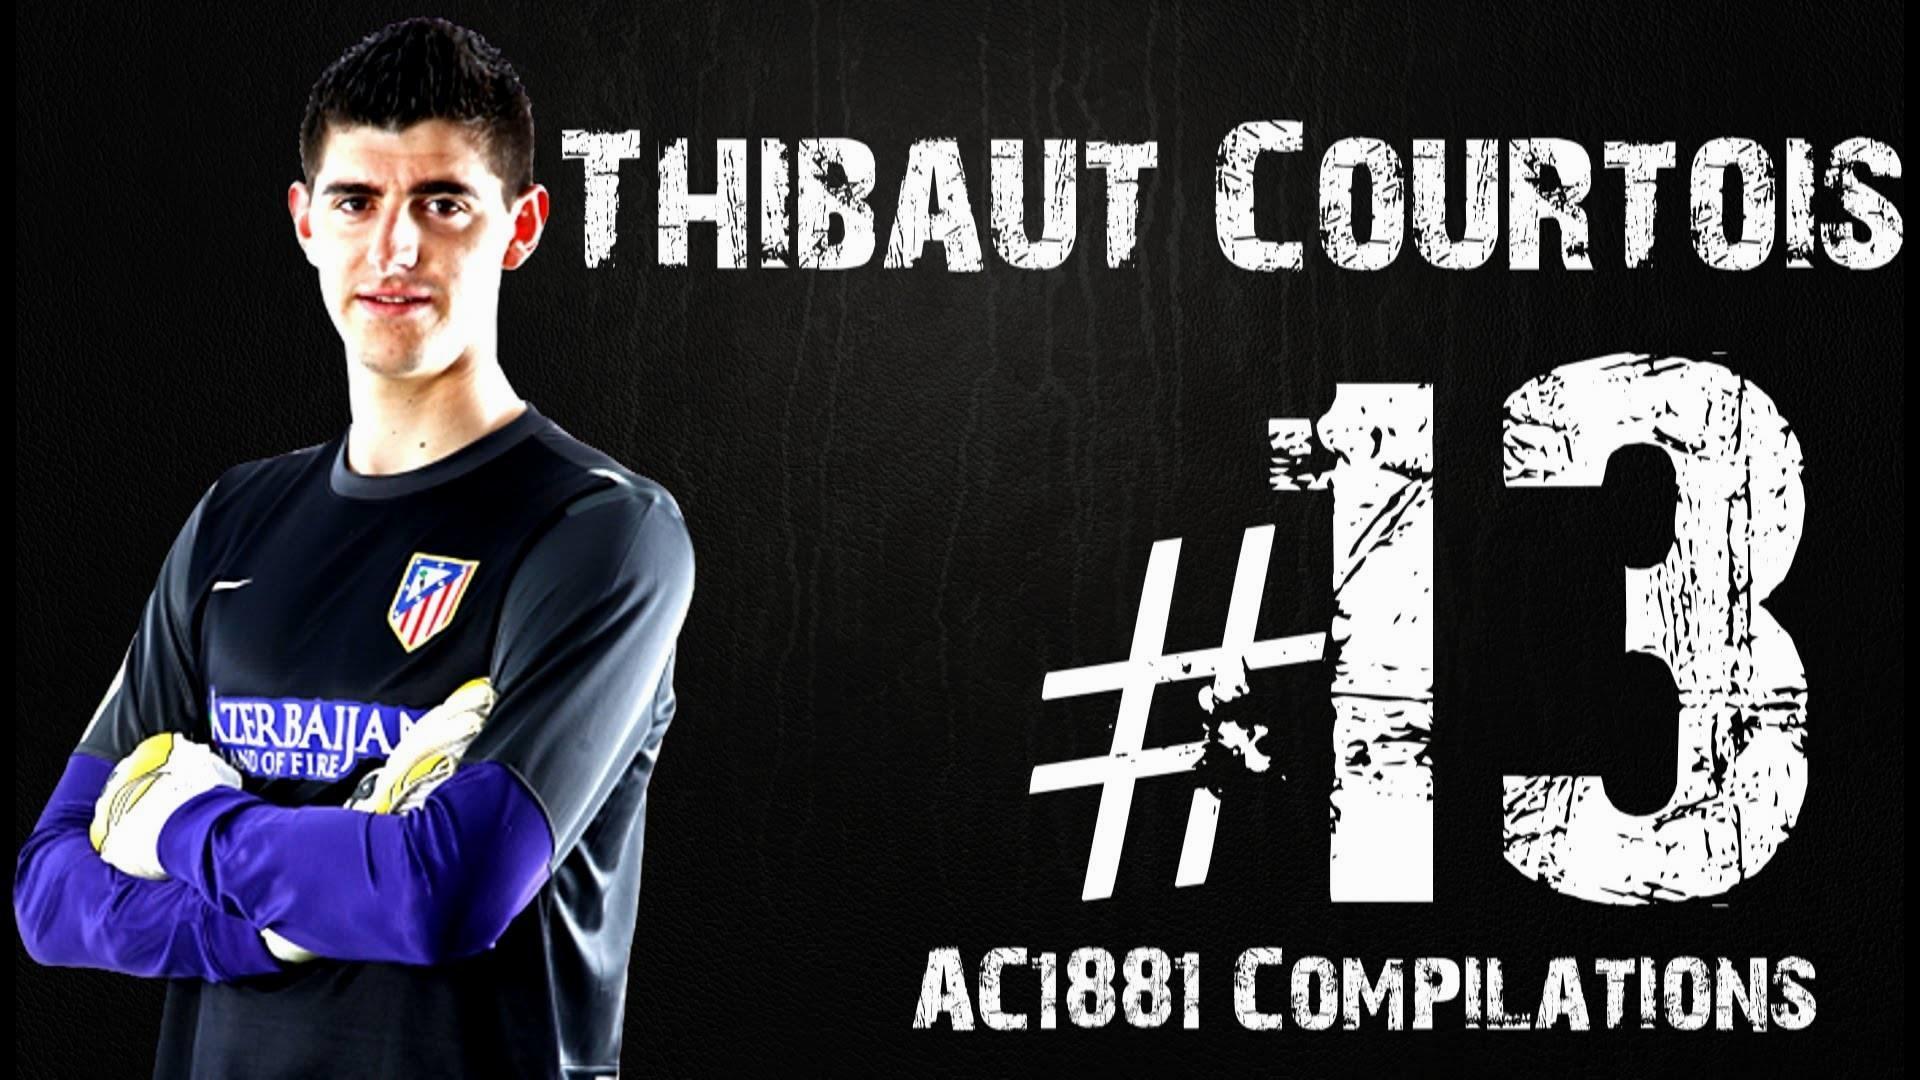 Courtois Wallpaper , Find HD Wallpaper For Free